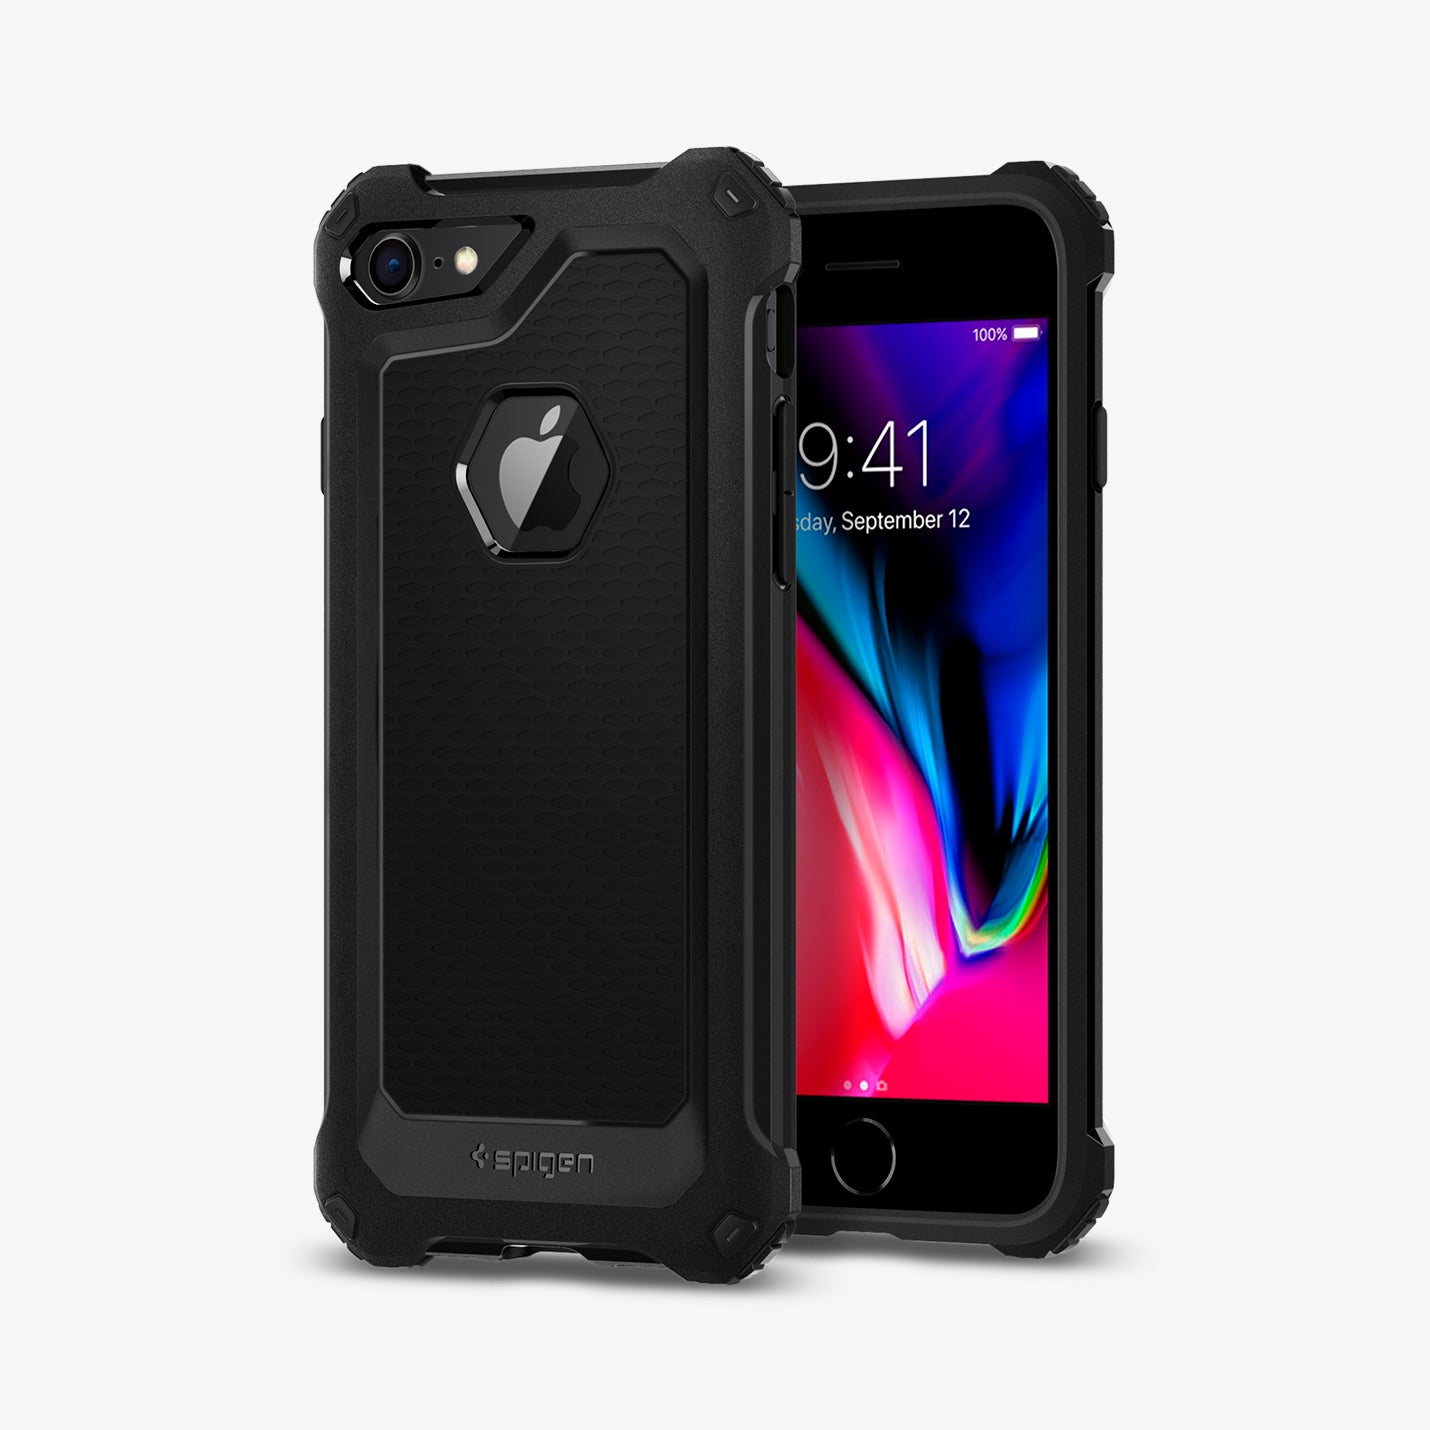 042CS21491 - iPhone 8 Case Rugged Armor Extra in Black showing the back, partial side next to it, a device showing front and partial side